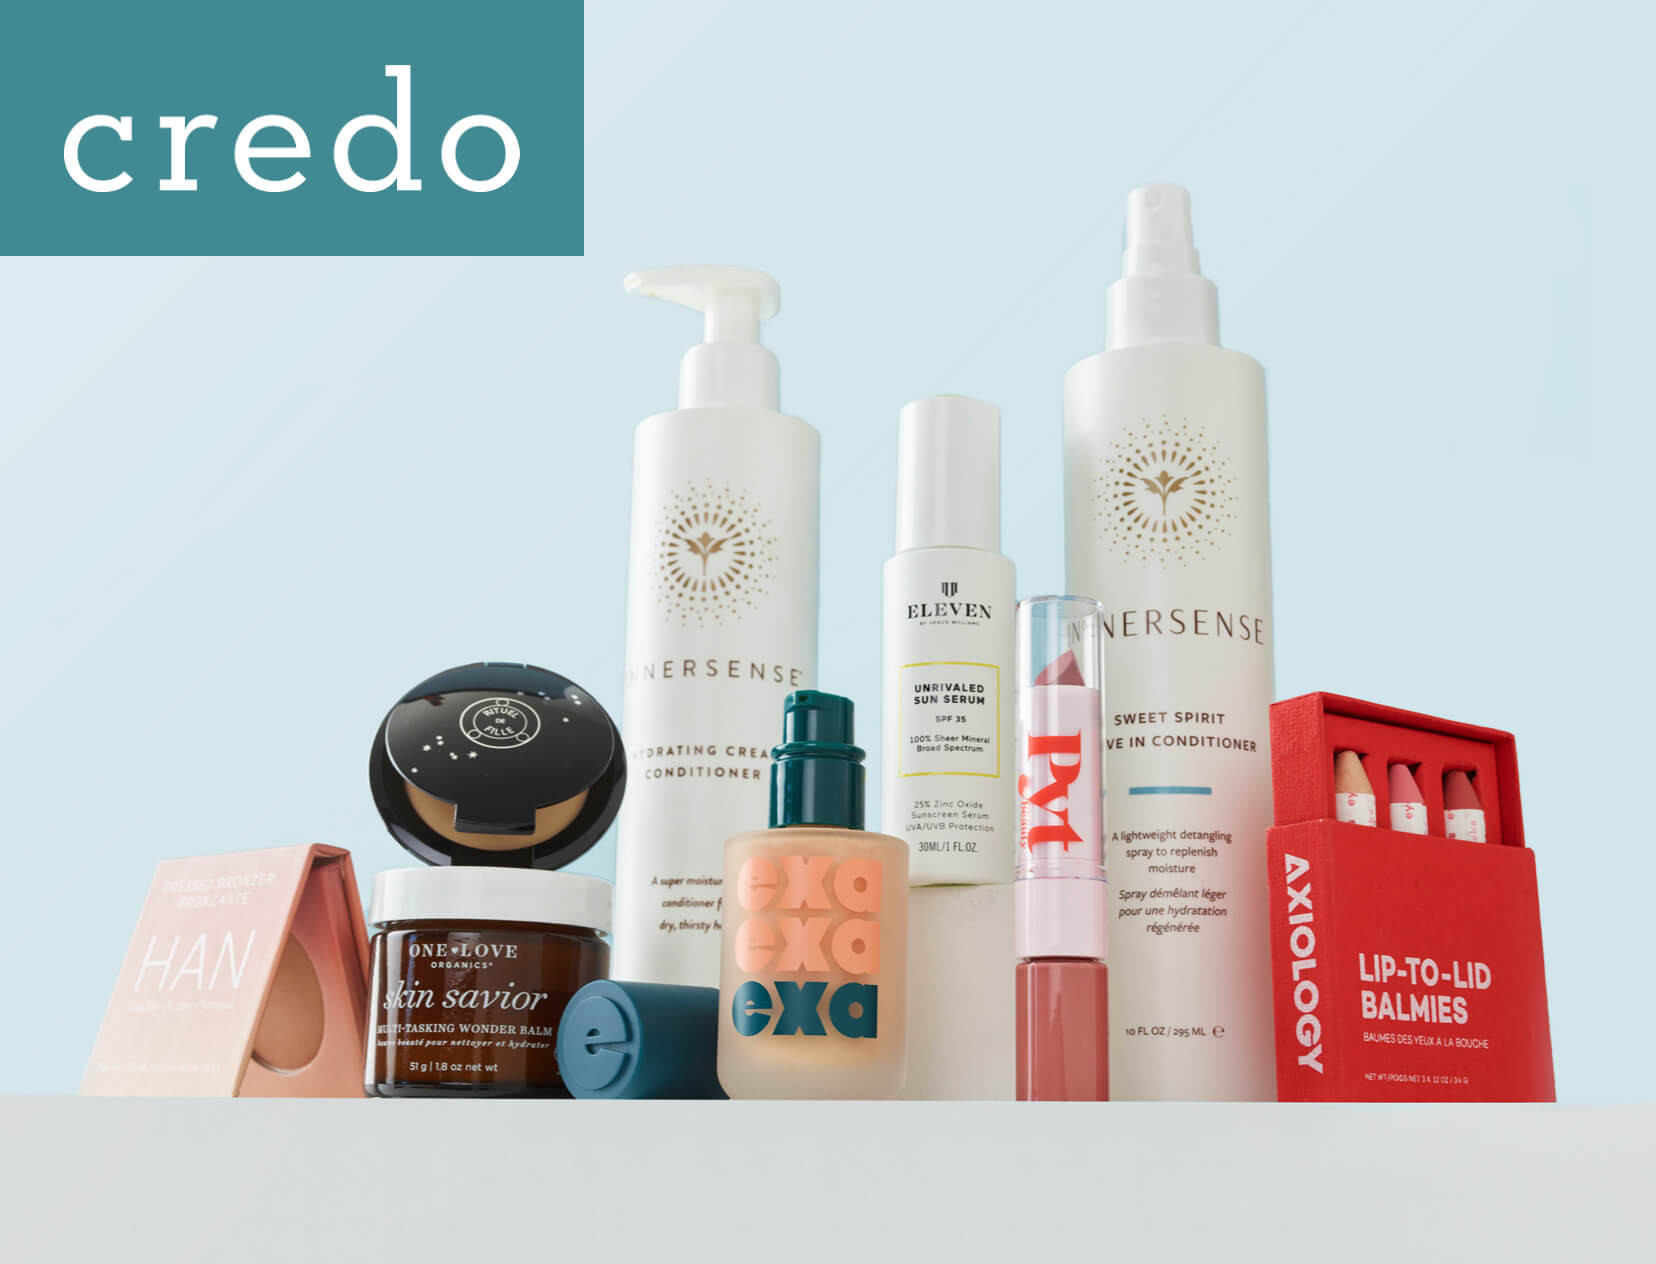 The Credo Collection